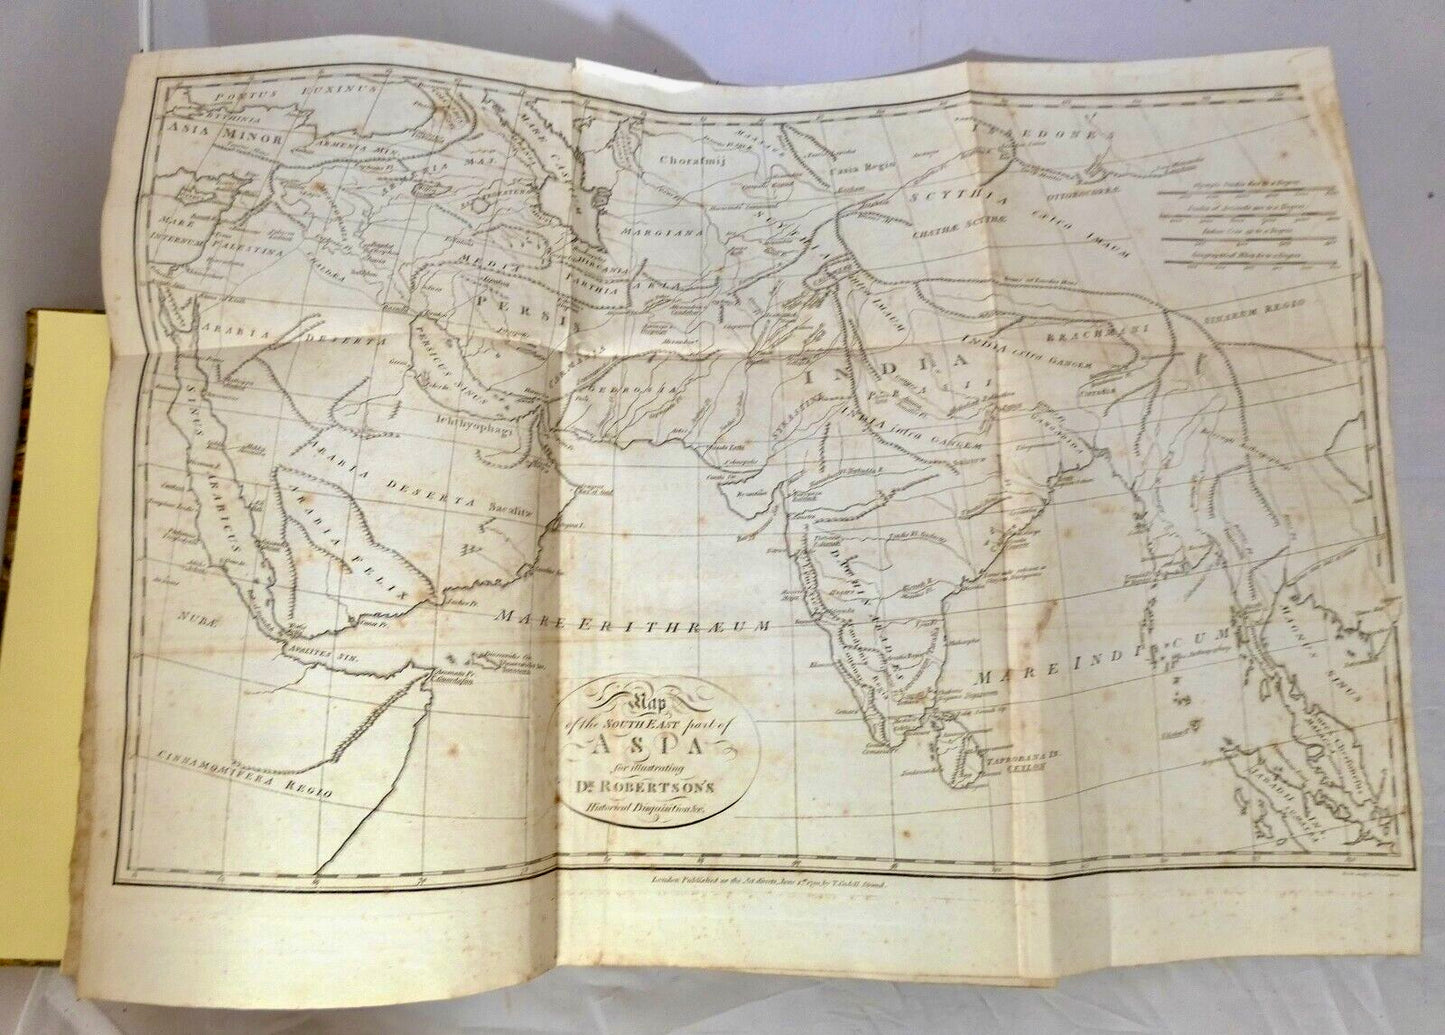 Progress of Trade prior to Cape of Good Hope Antique Book with Map